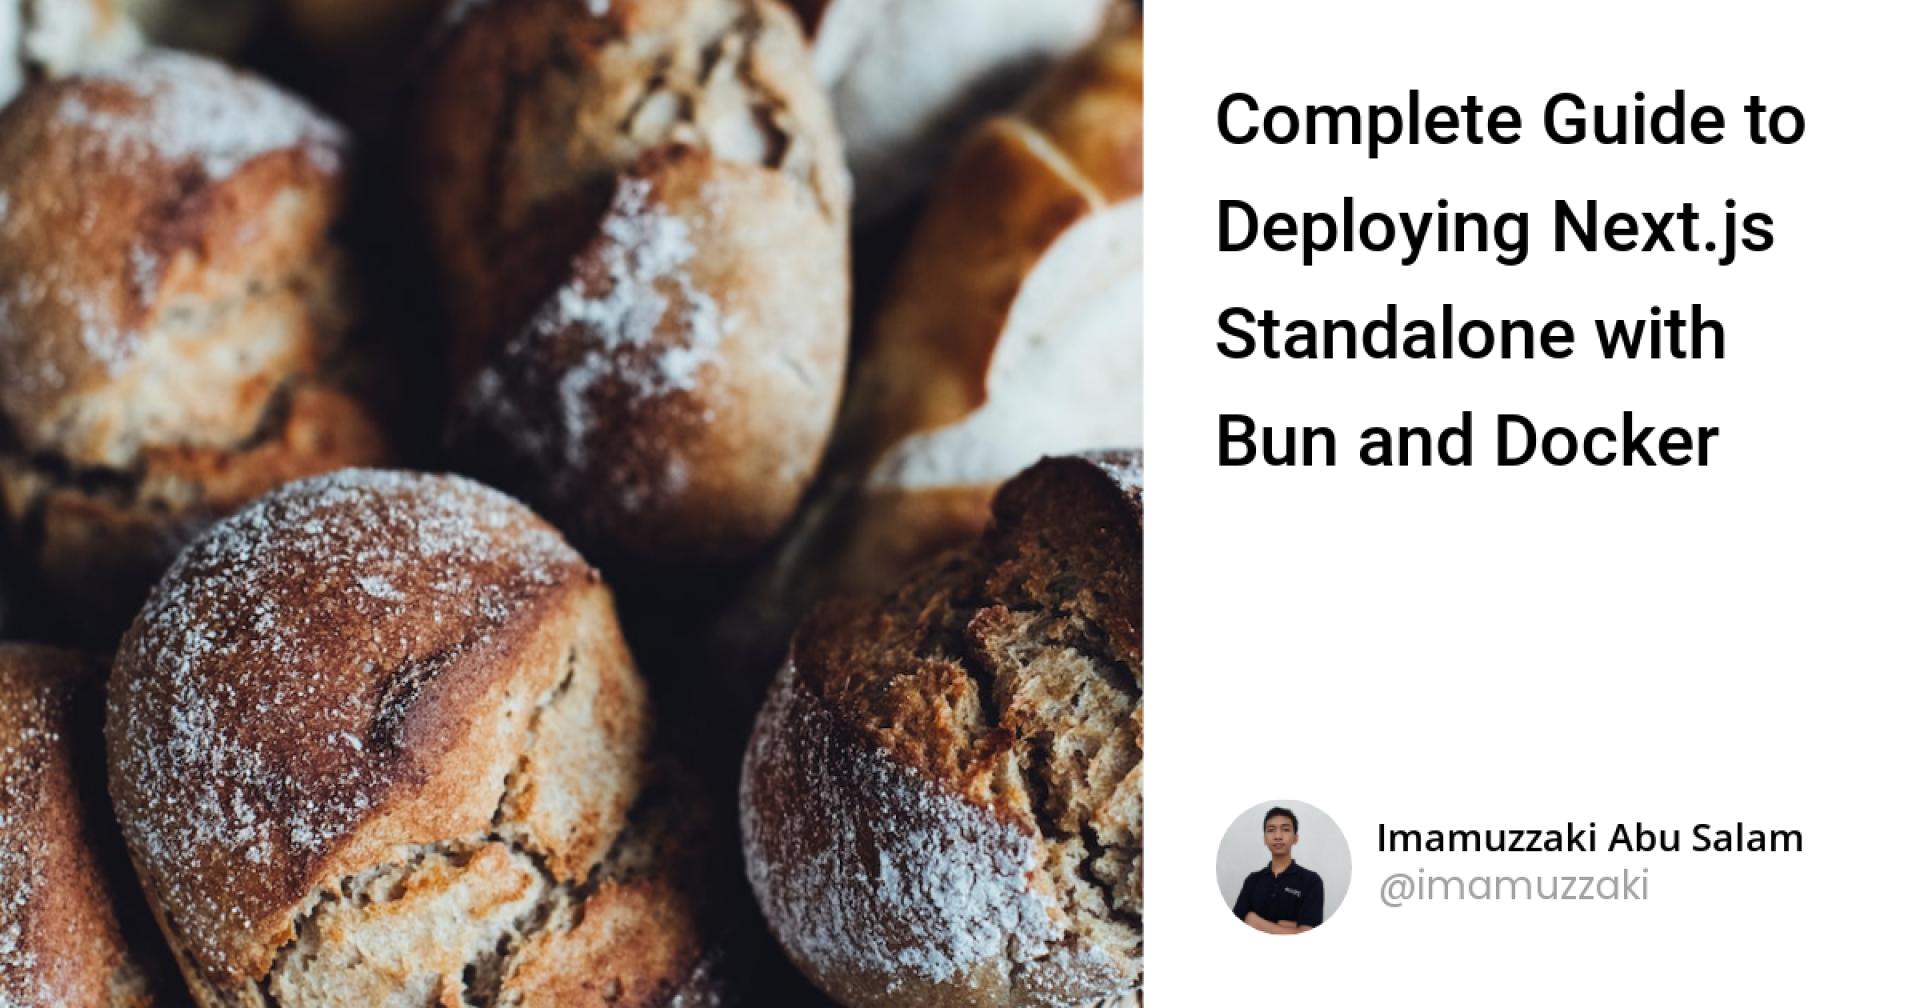 Complete Guide to Deploying Next.js Standalone with Bun and Docker